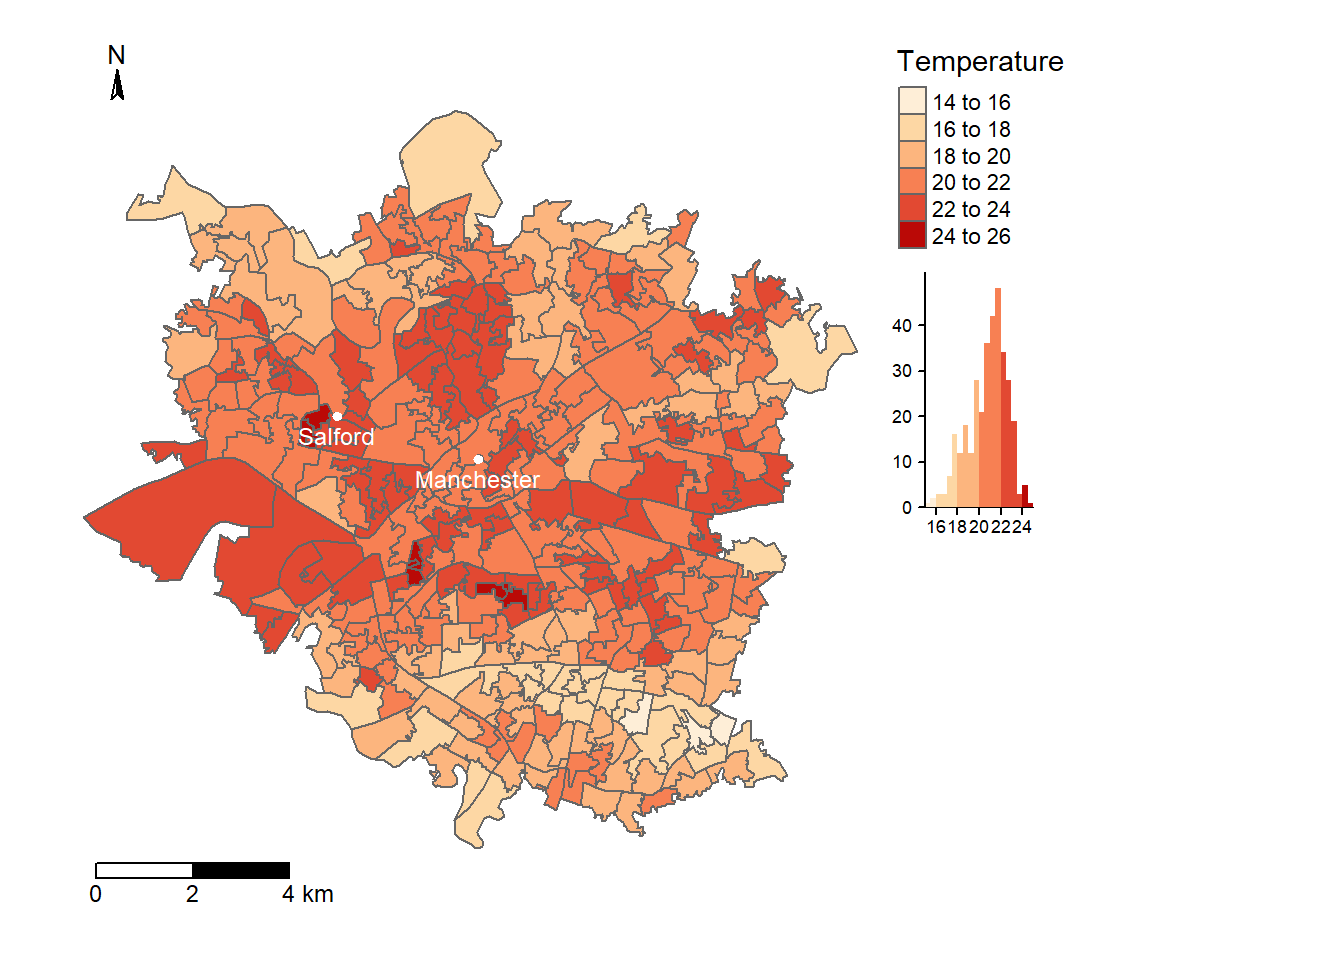 Average temperature per LSOA in Manchester, calcualted from Landsat imagery dated 13/5/19, following the methodology specified by Guha et al. 2018